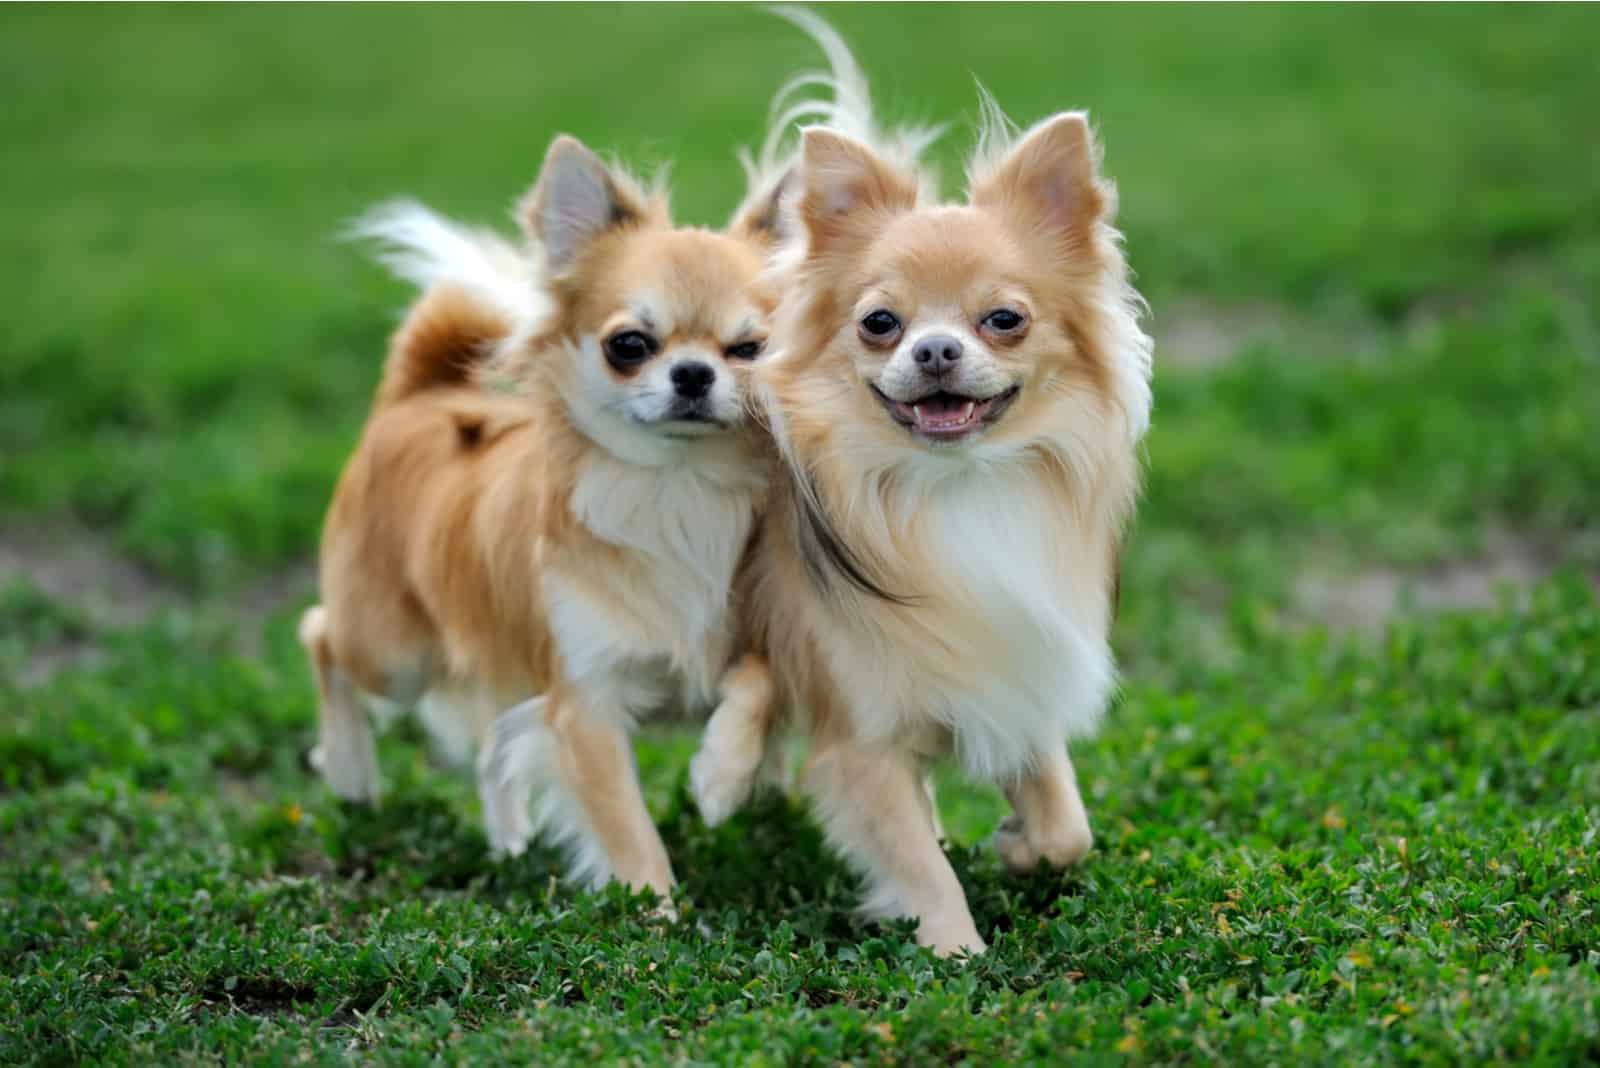 How Much Do Chihuahuas Cost? Chihuahua Puppy Price And Expenses Calculated